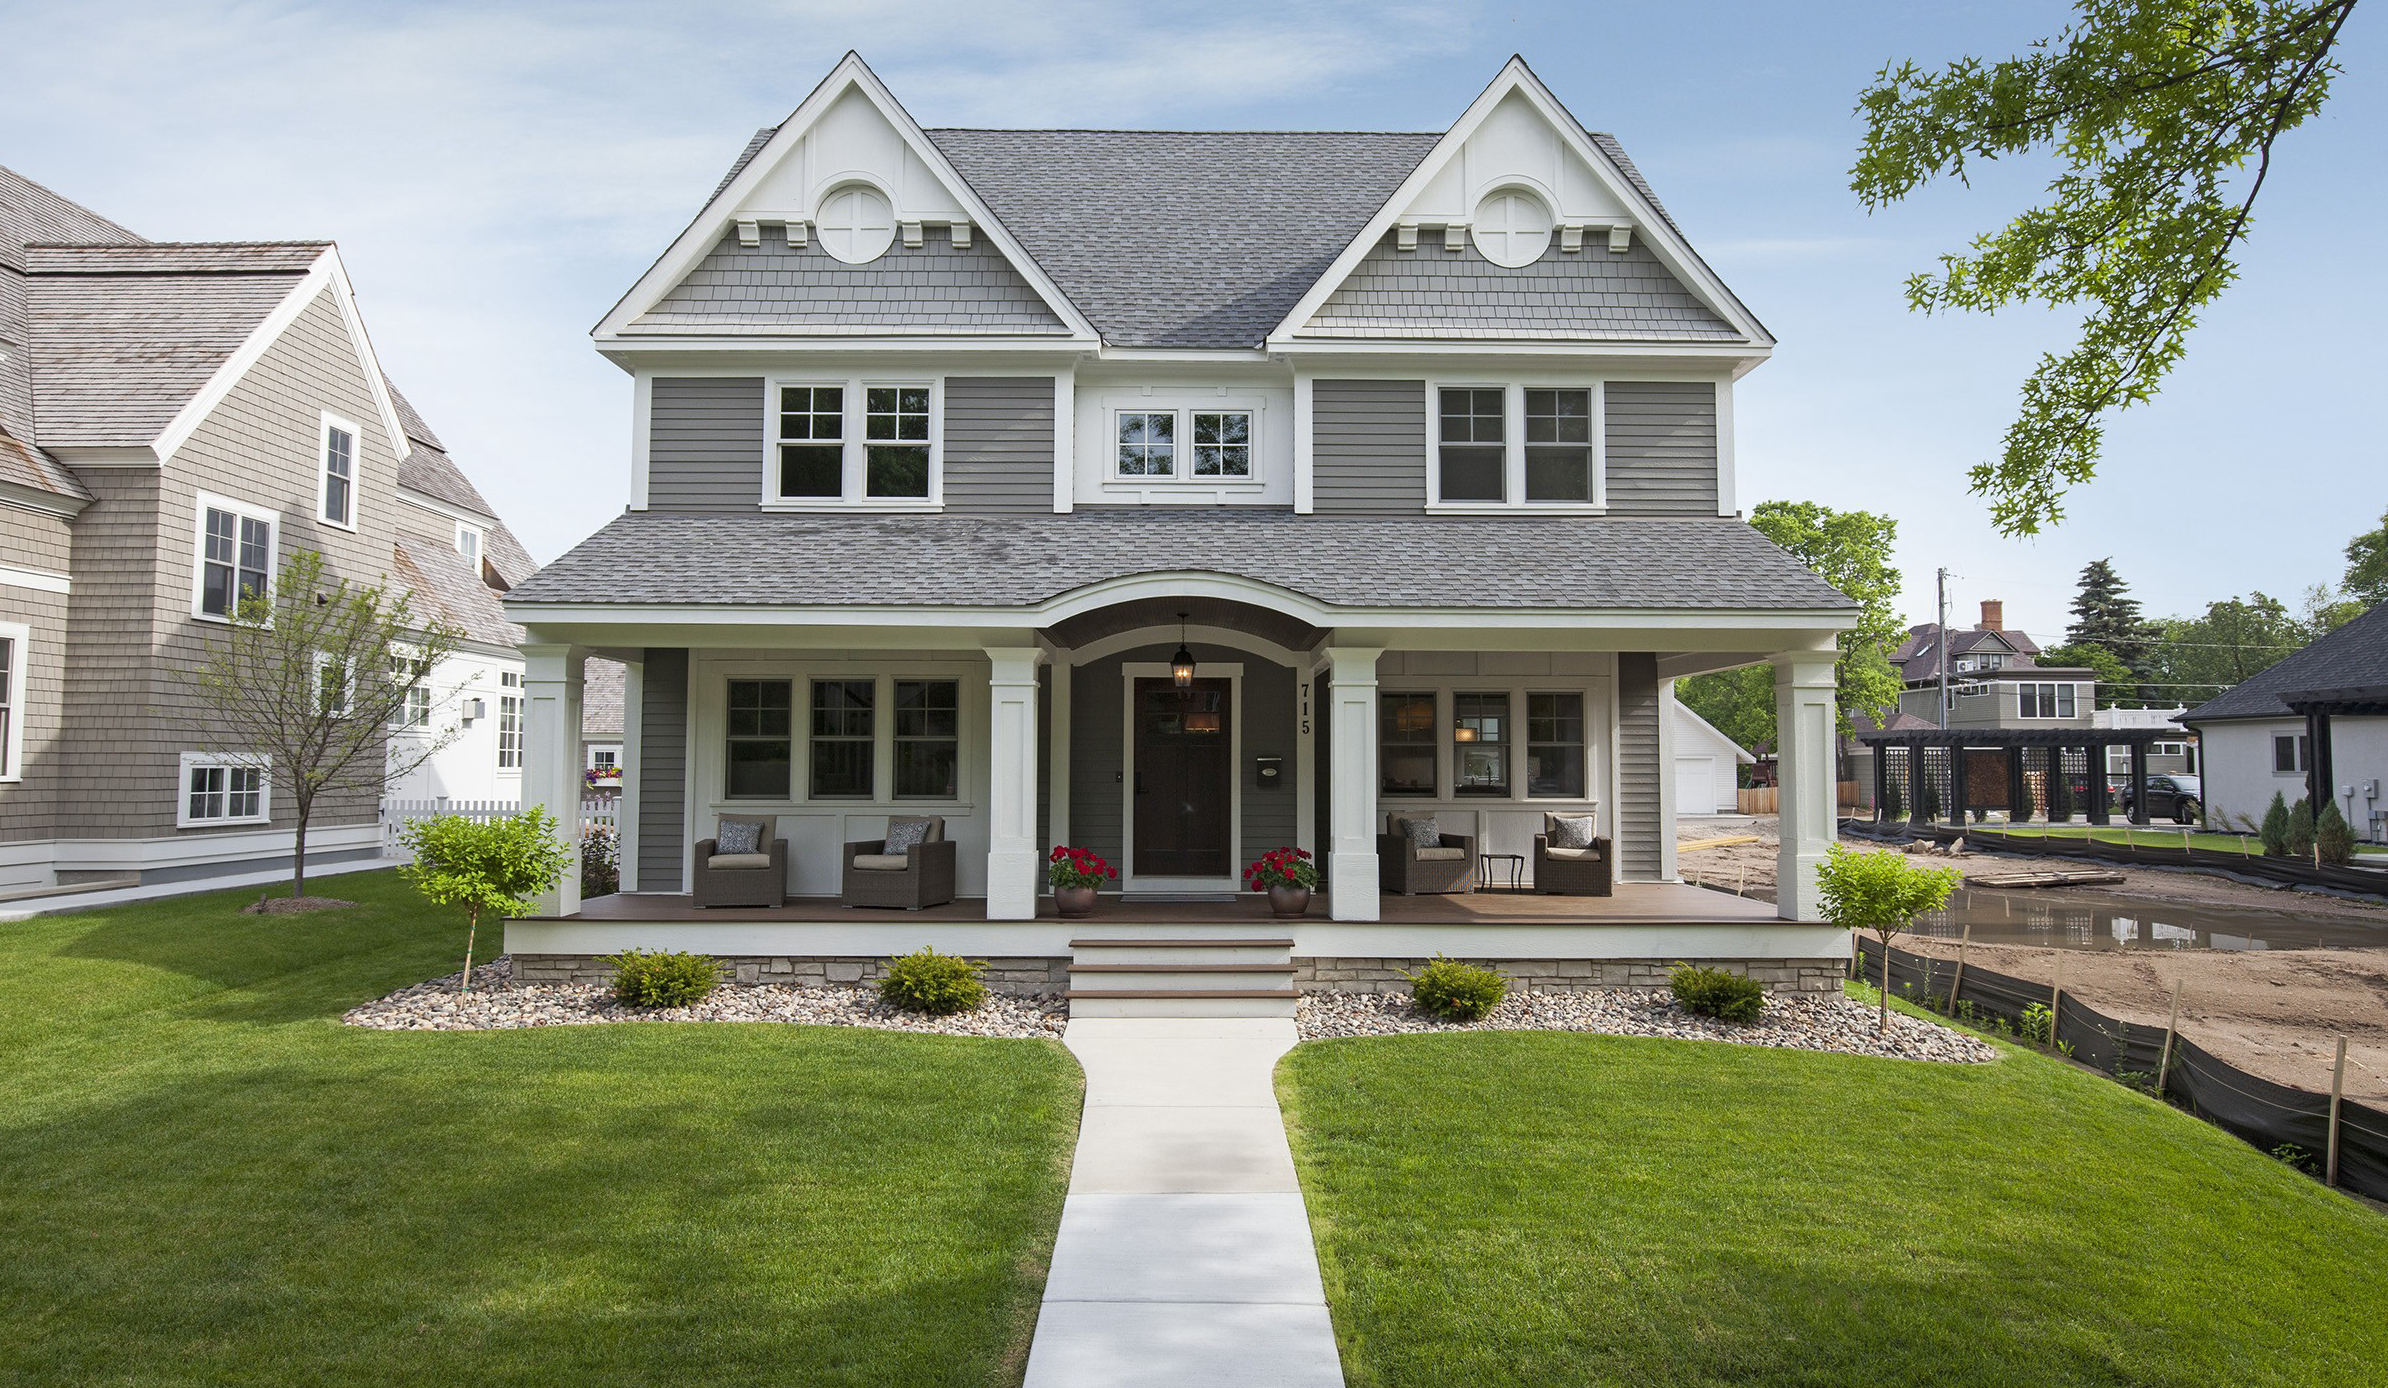 How To Boost Your Home’s Curb Appeal and Value